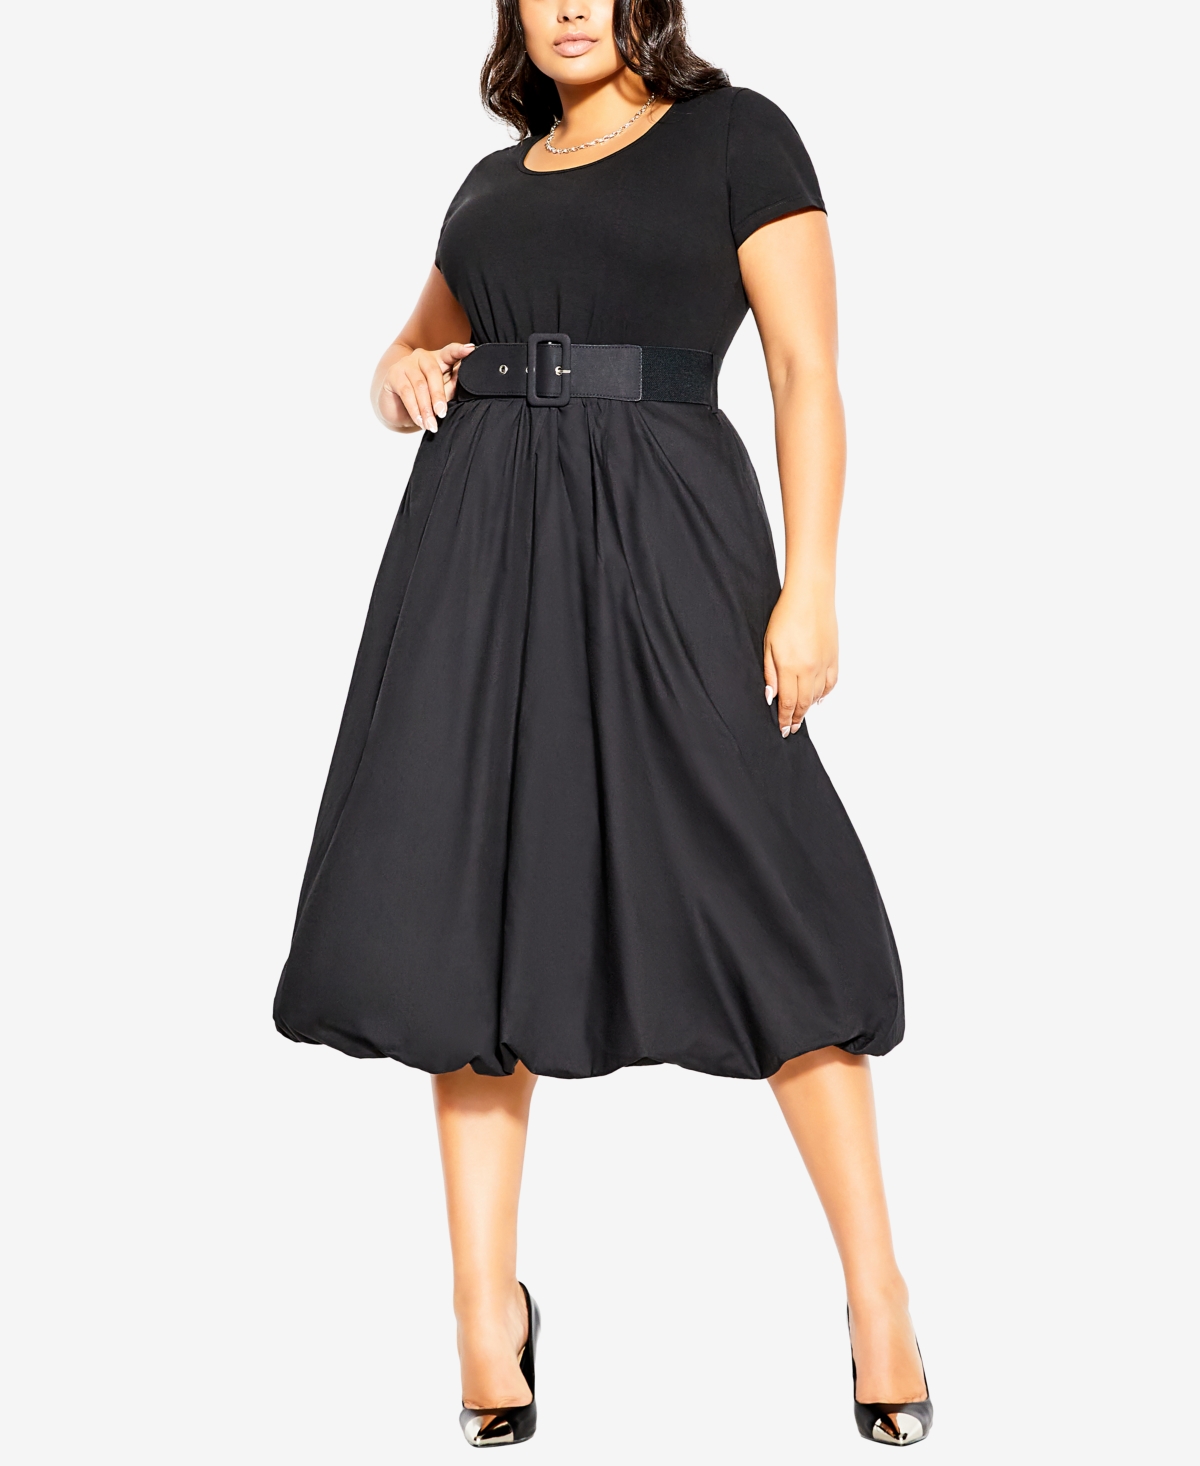 City Chic Trendy Plus Size Paris Days Dress In Black And Pop Pink ...